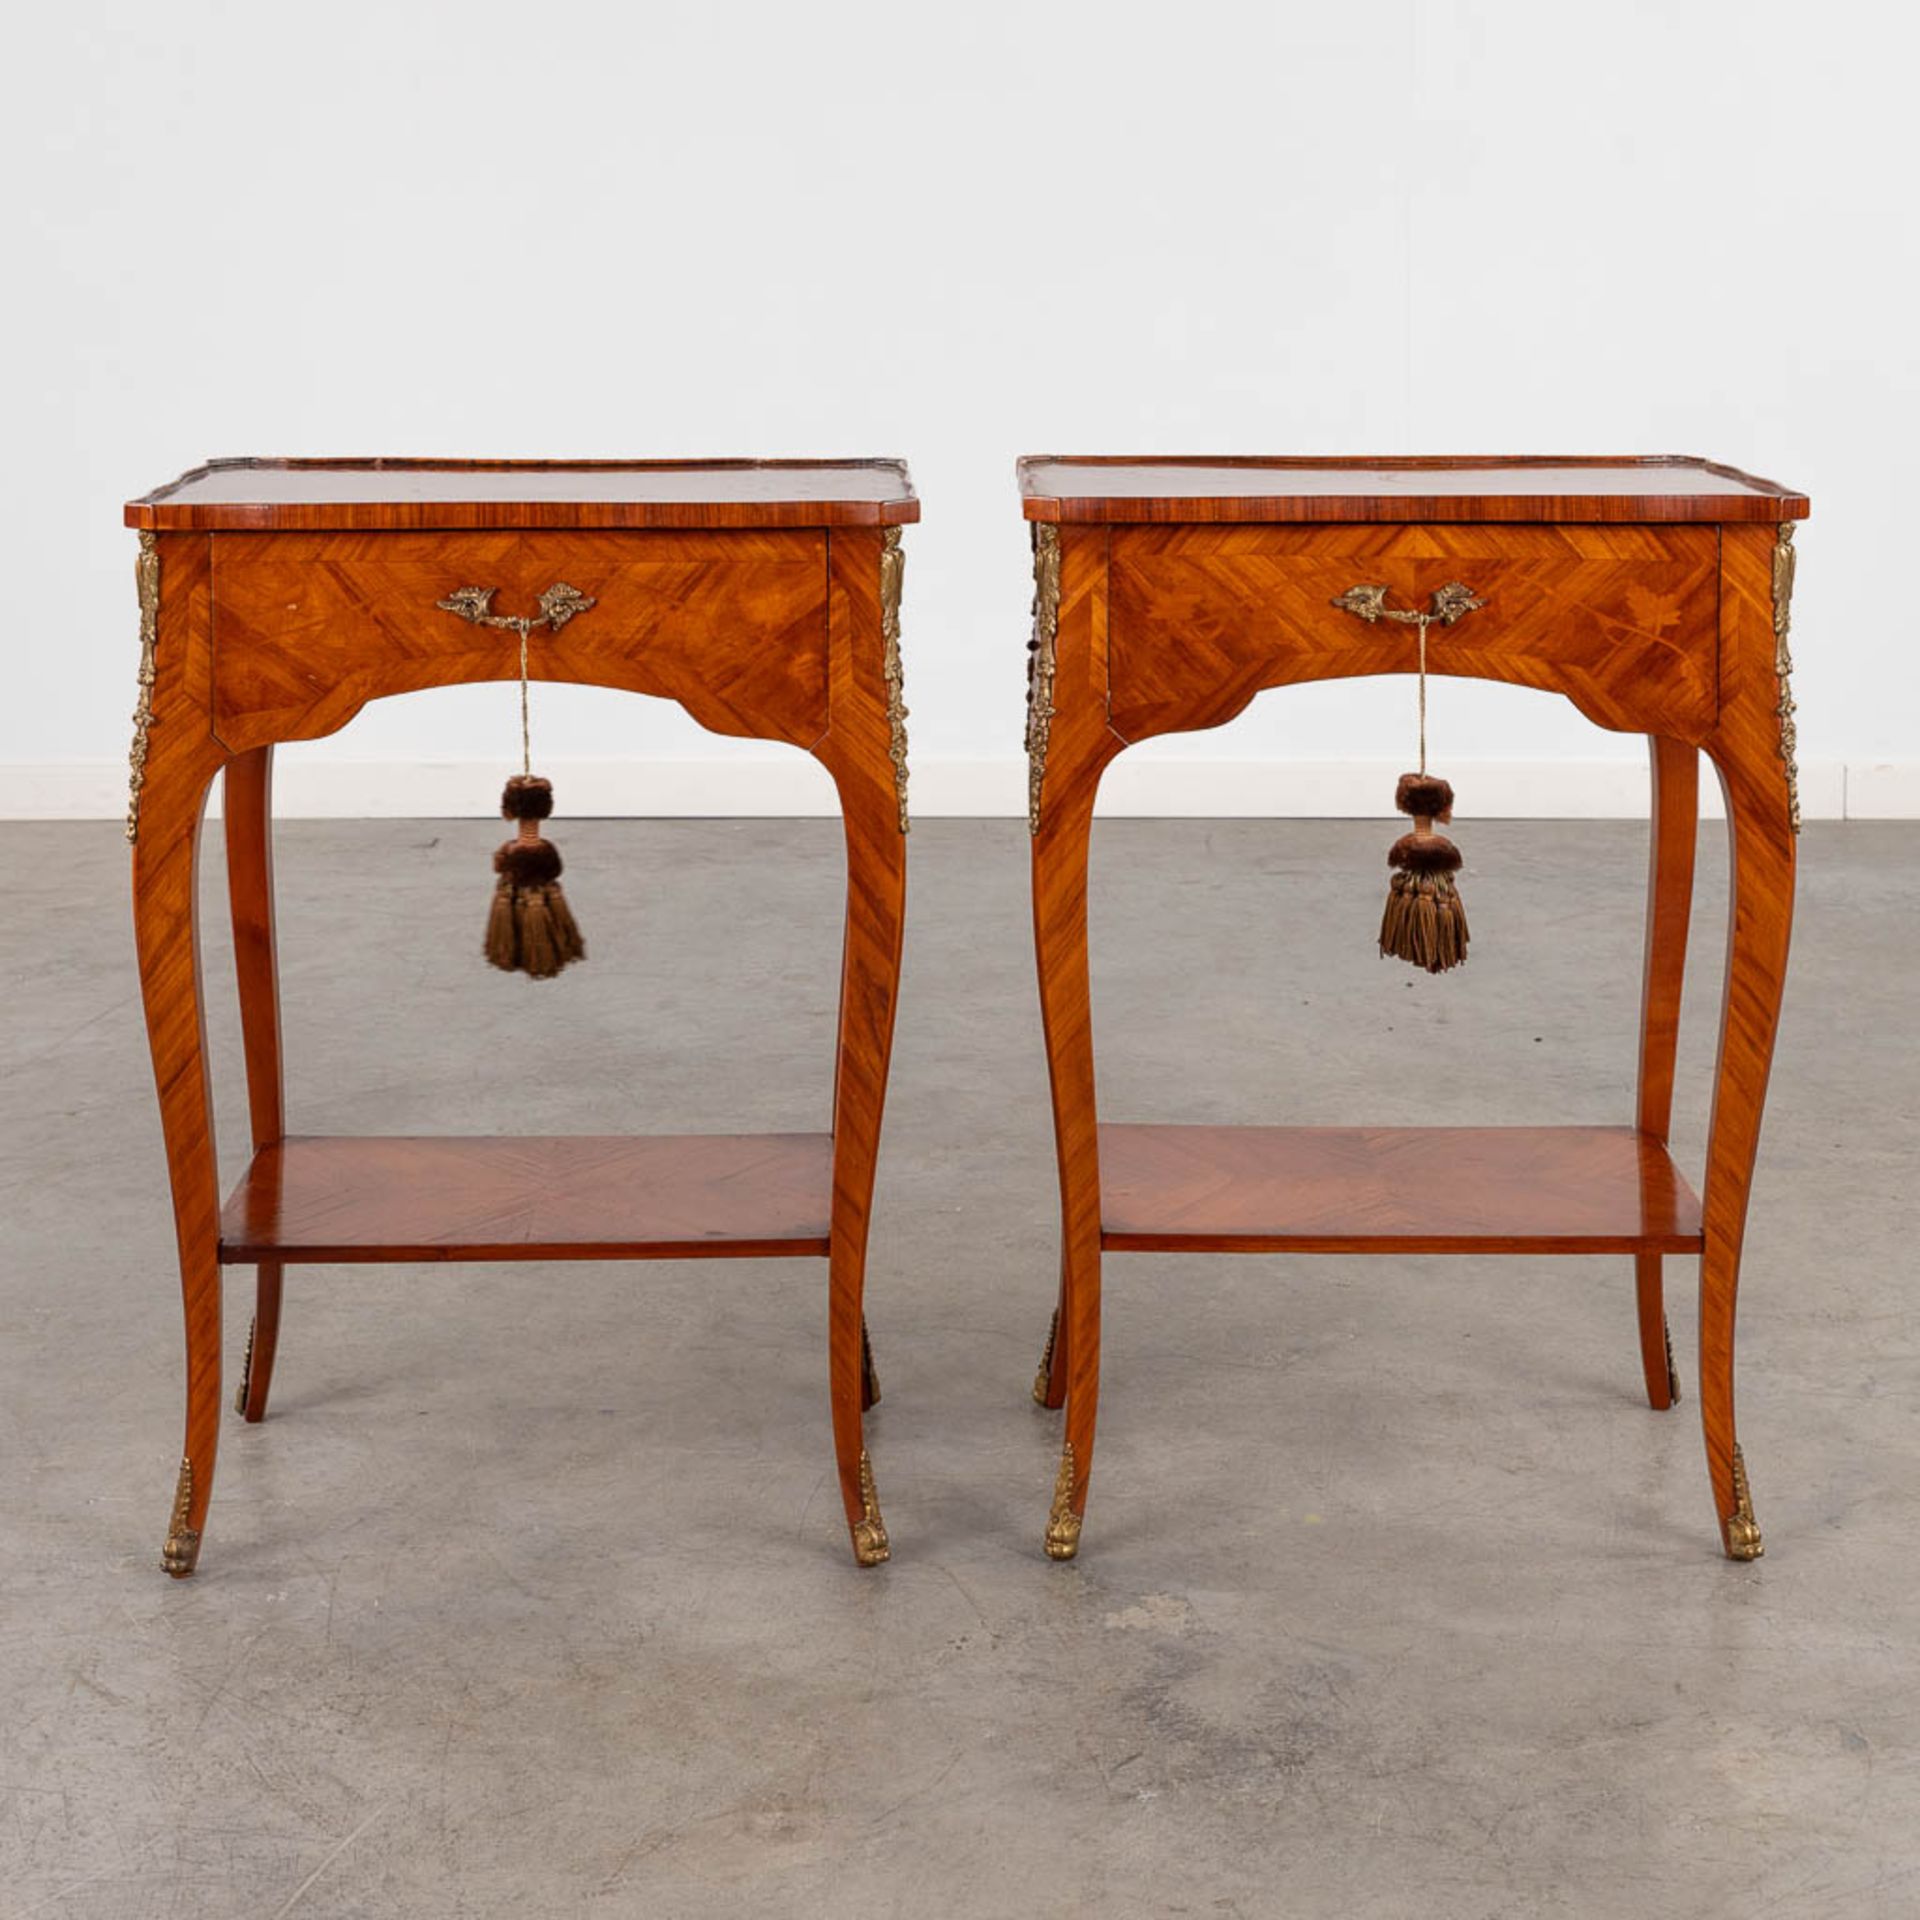 A pair of two-tier side tables with a drawer, wood with marquetry inlay. 20th C. (D:30 x W:45 x H:63 - Image 4 of 14